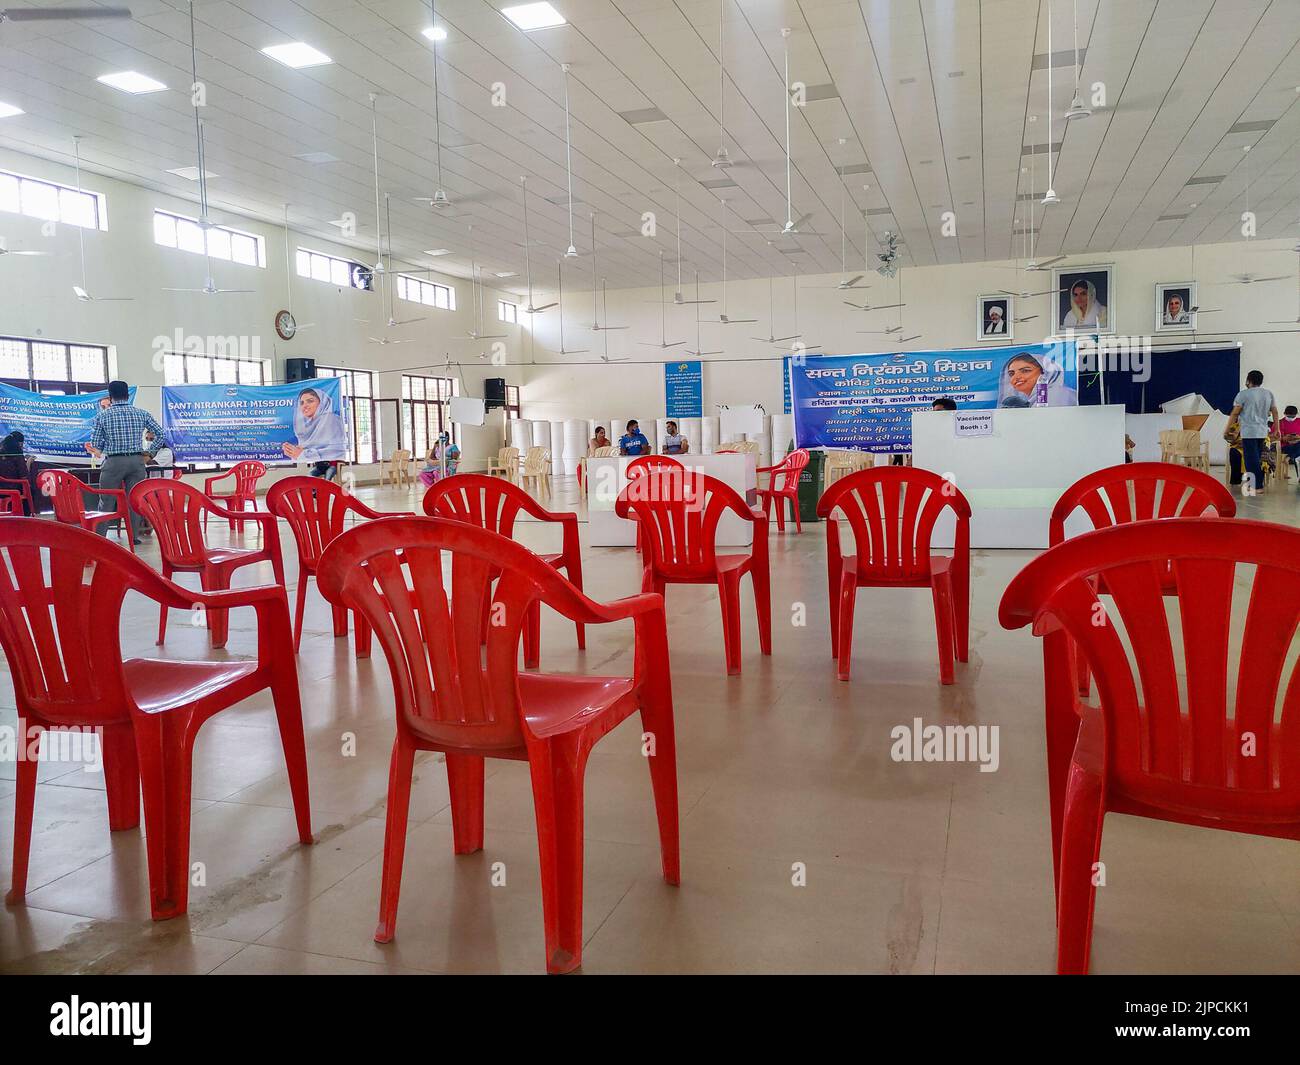 June 24th 2021 Dehradun India. Corona Virus Vaccination drive taking place with chairs and people maintaining social distancing. Stock Photo